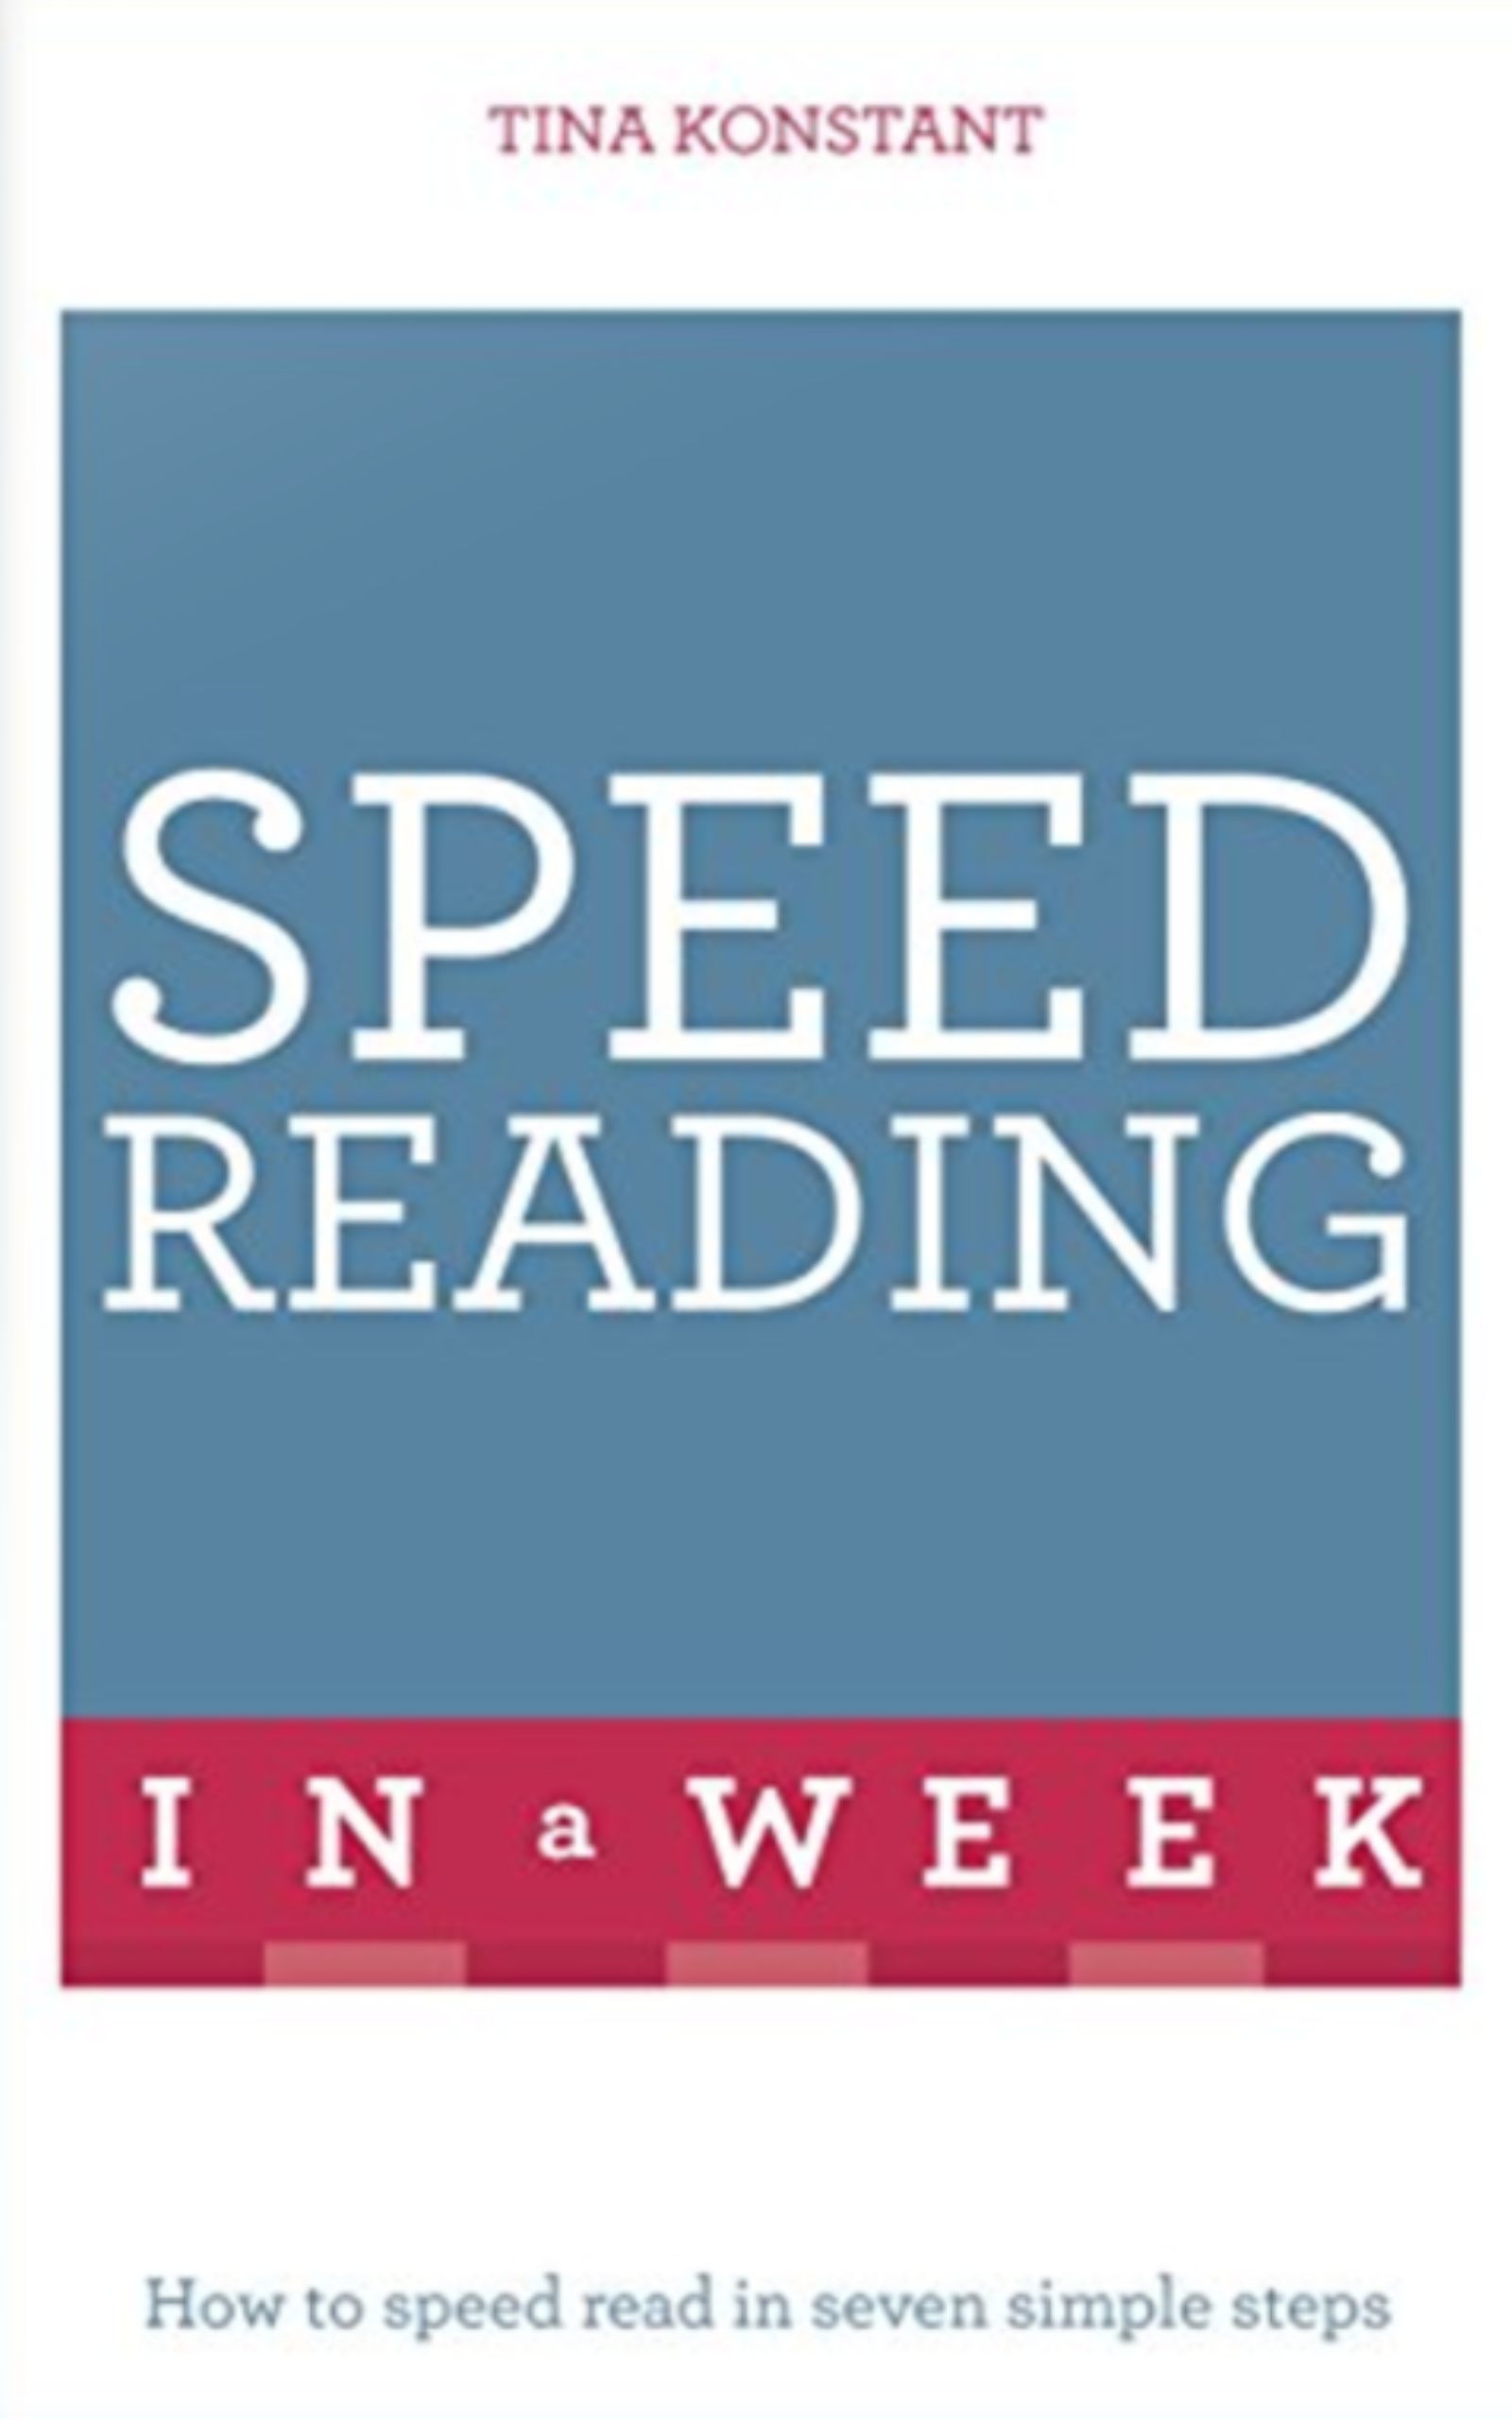 Speed-Reading in a Week by Tina Konstant